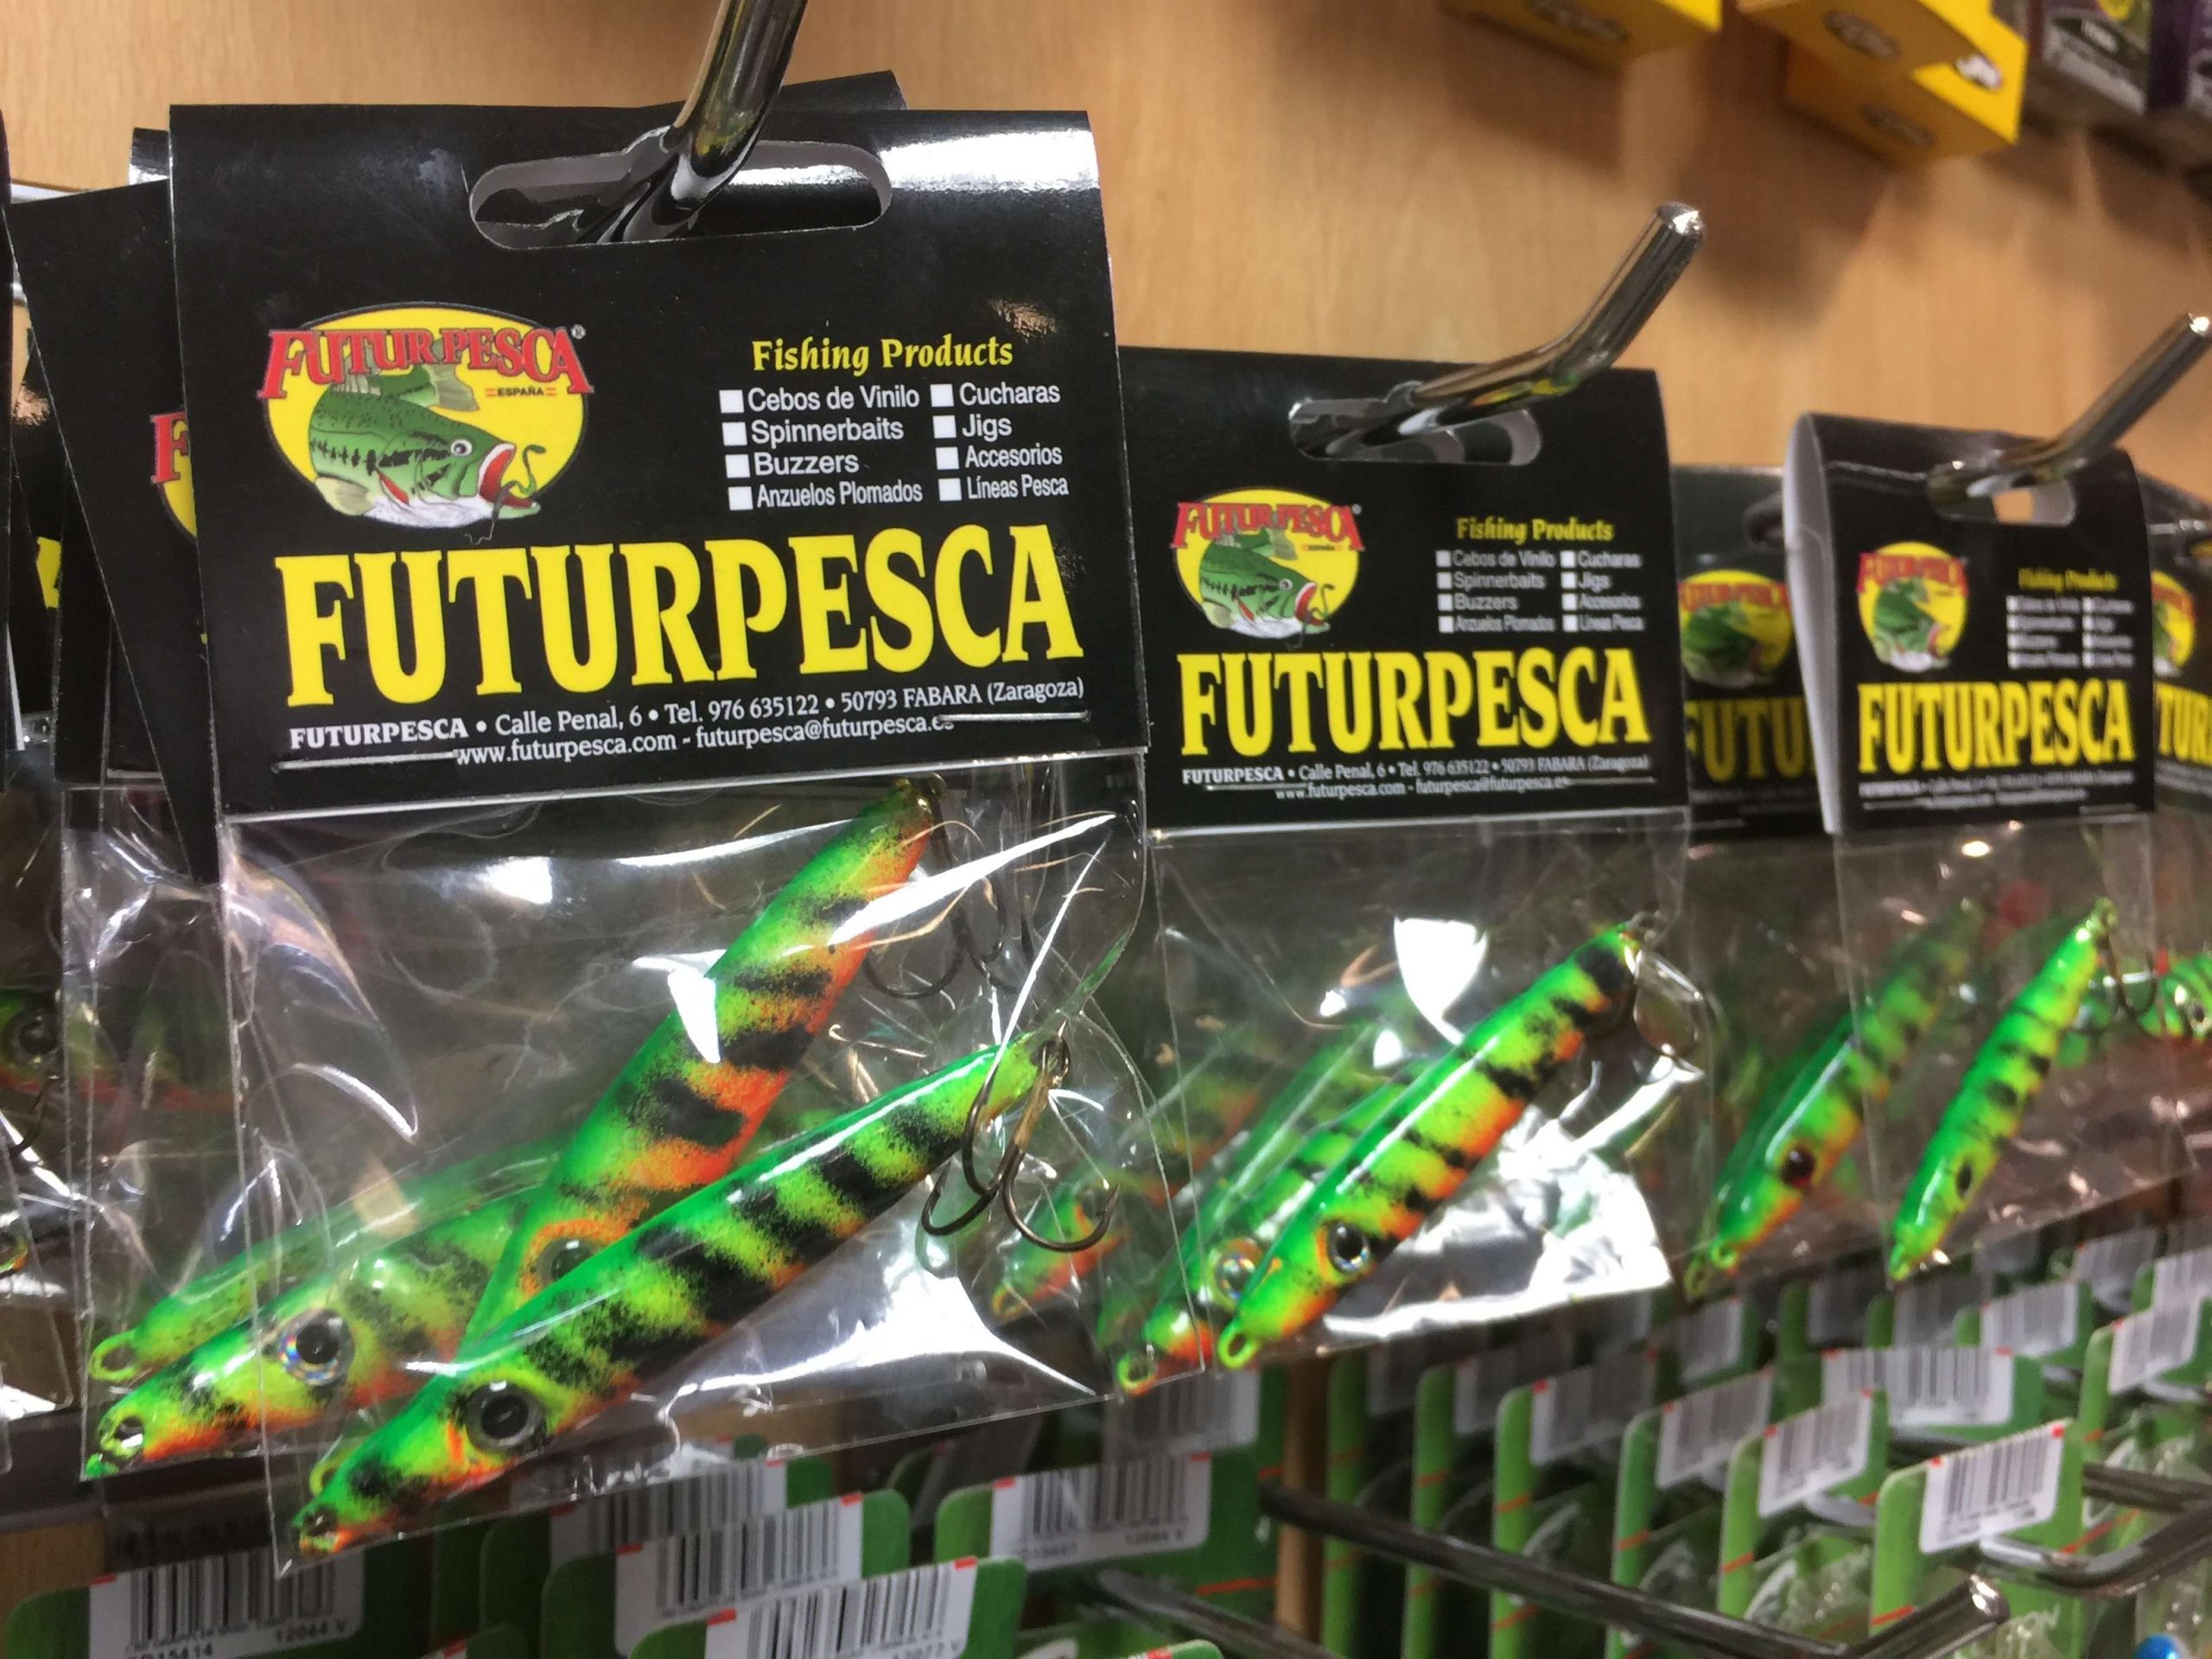 The Futurpesca brand was one of the first lures manufactured in Spain. Itâs owner, Marcos Calleja, is a famous journalist in the country. His stories in various magazines helped ignite the bass fishing frenzy in his homeland. And yes, his baits are quite popular.